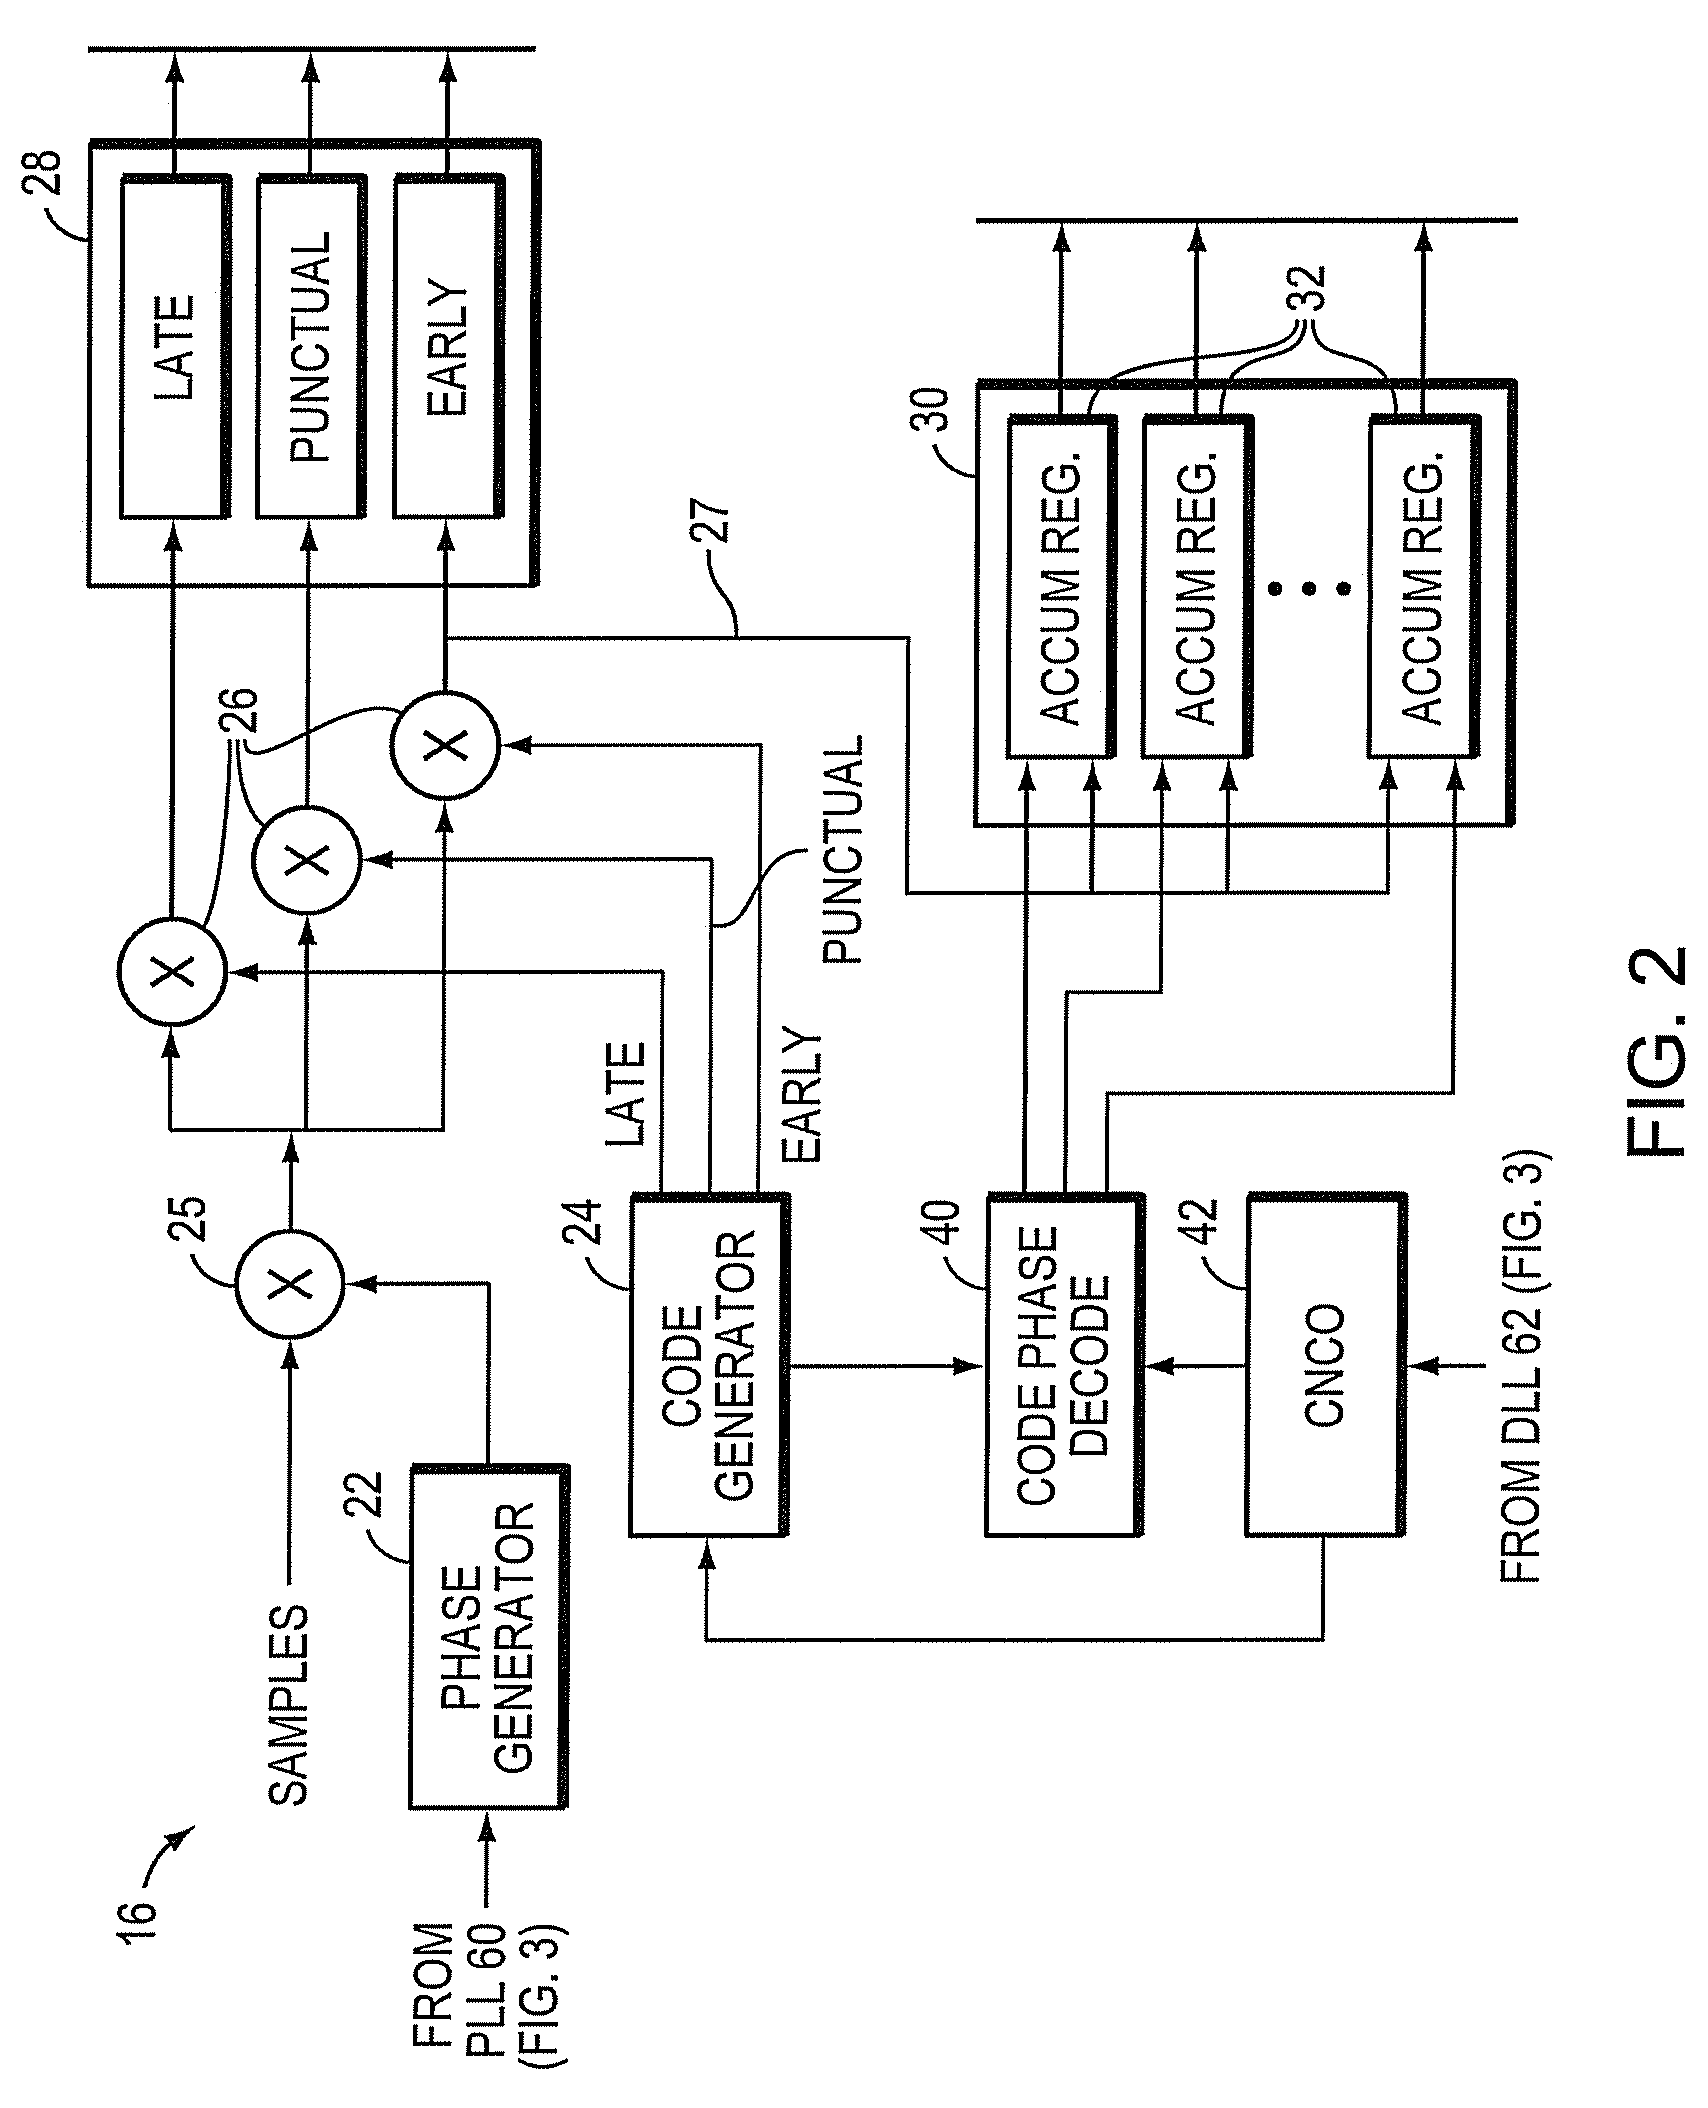 Apparatus for and method of correlating to rising chip edges